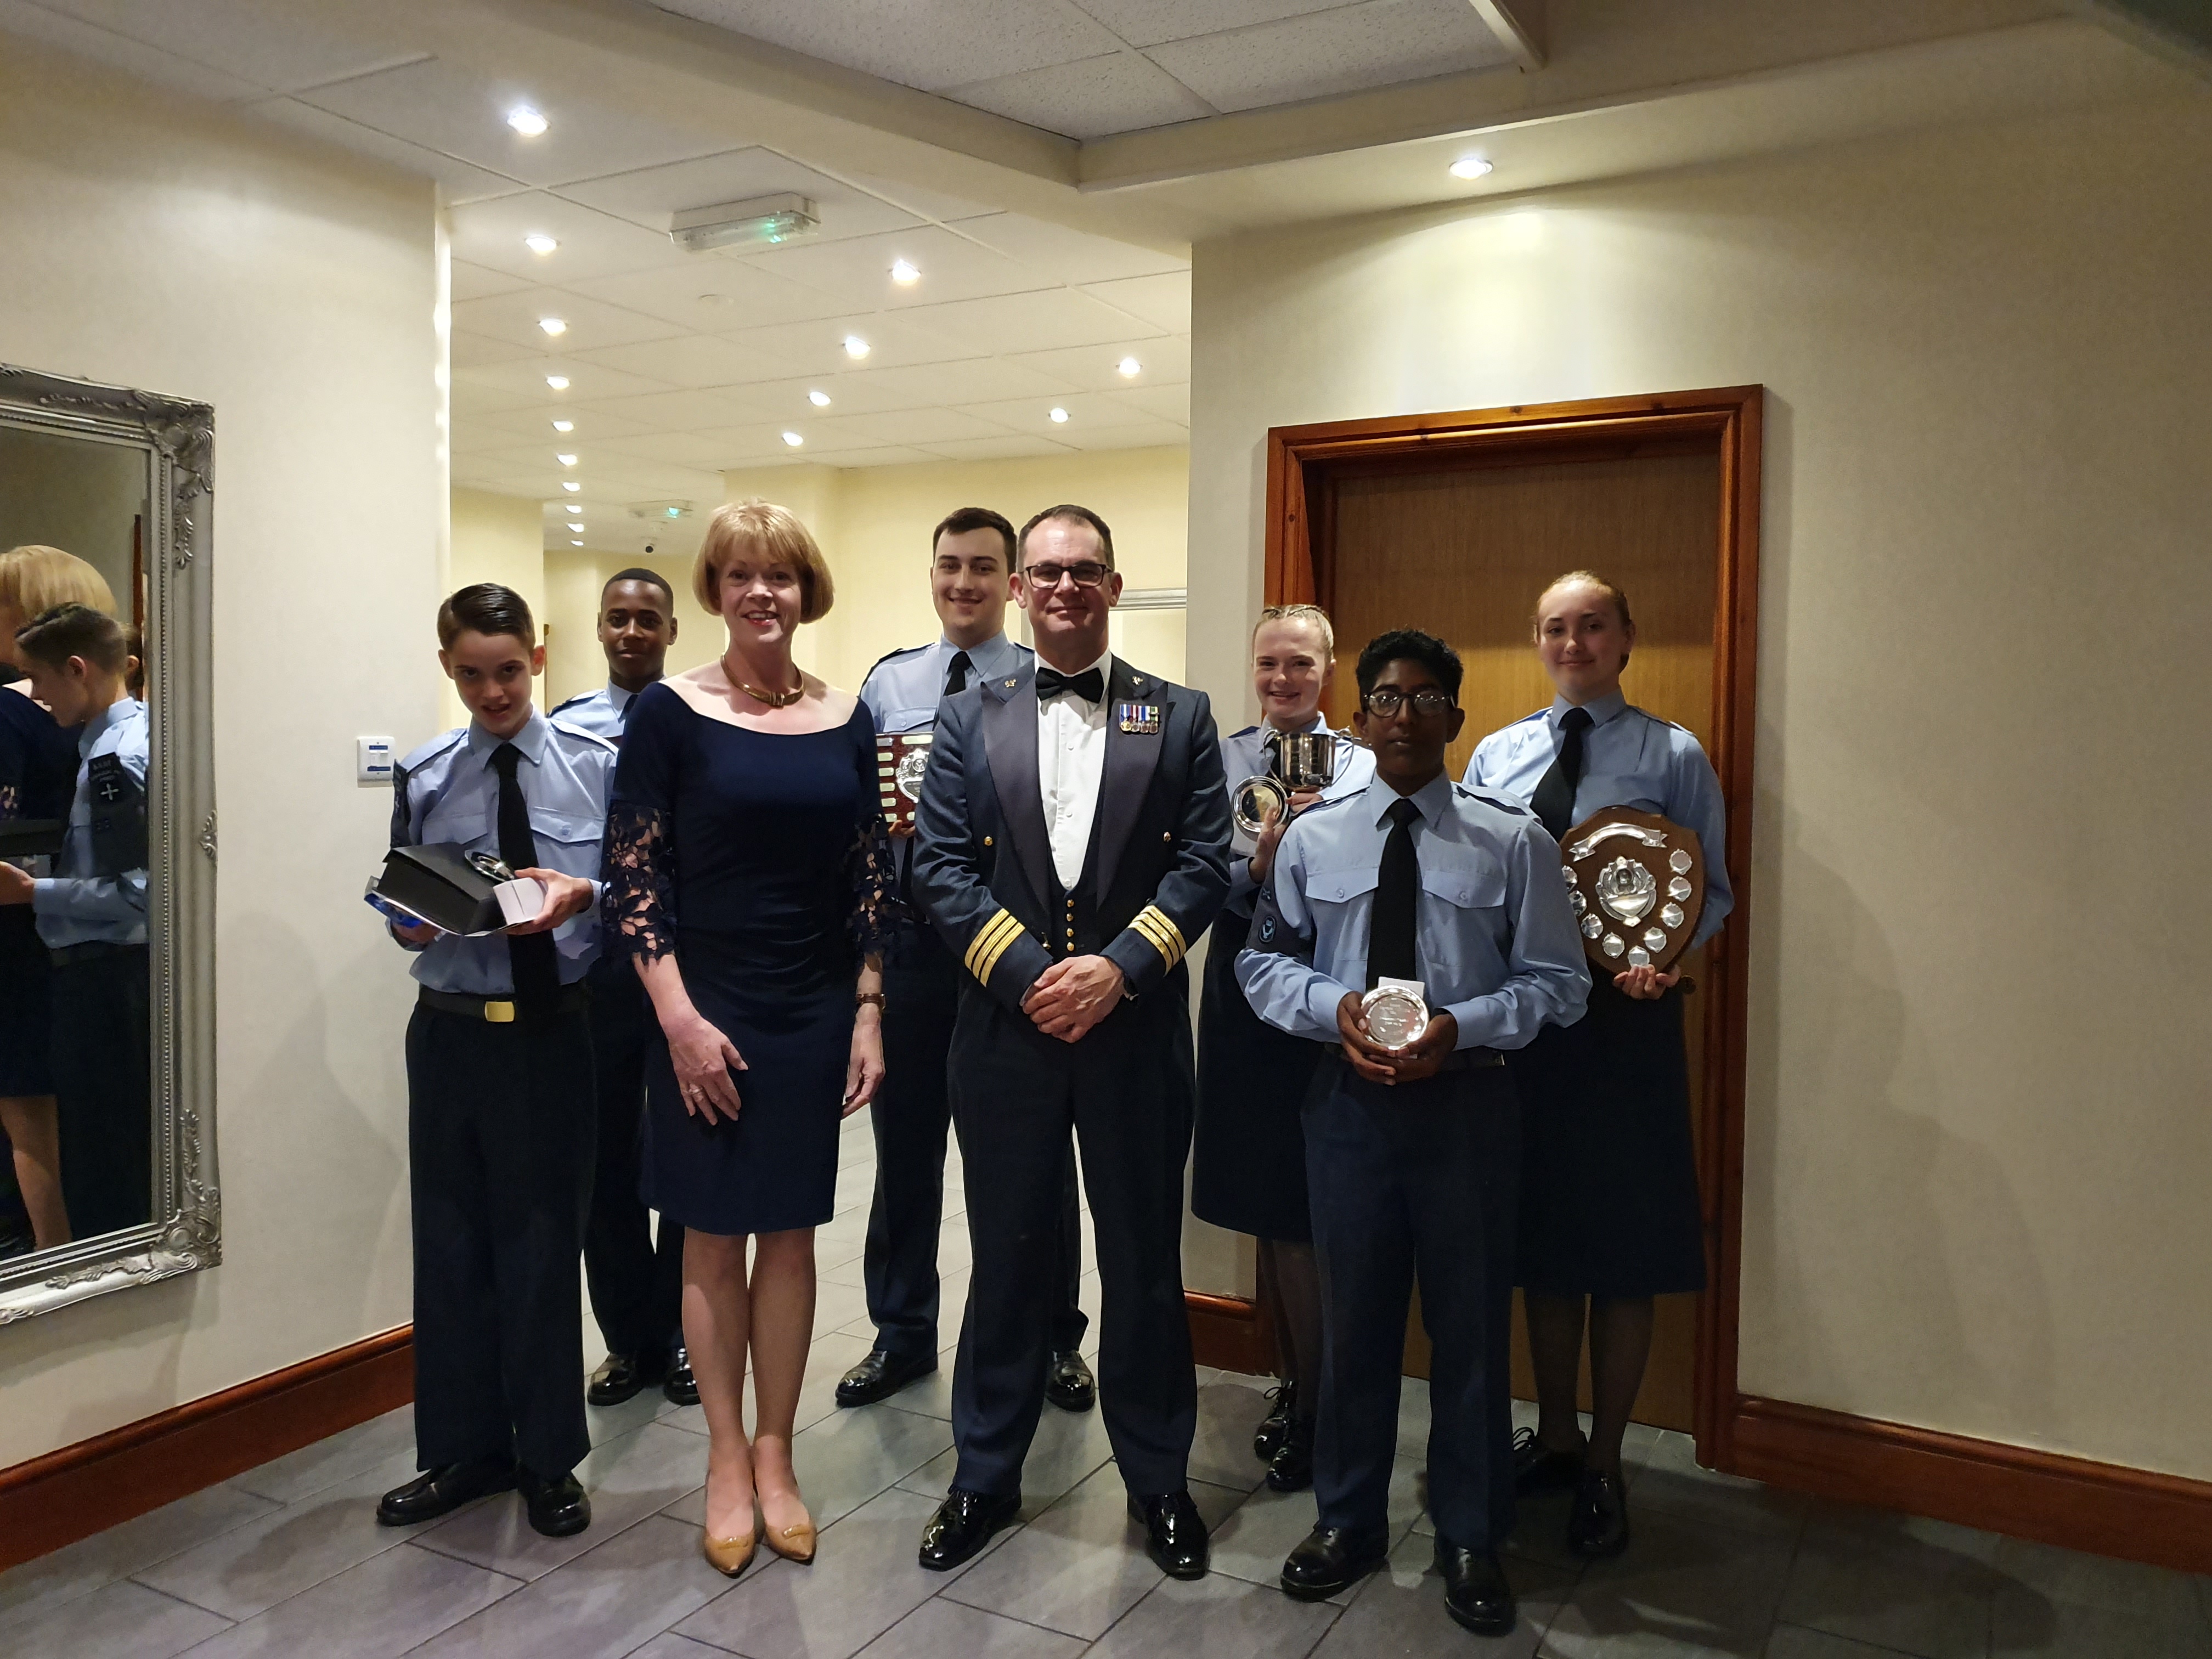 Brownhills Air Cadets Dine In